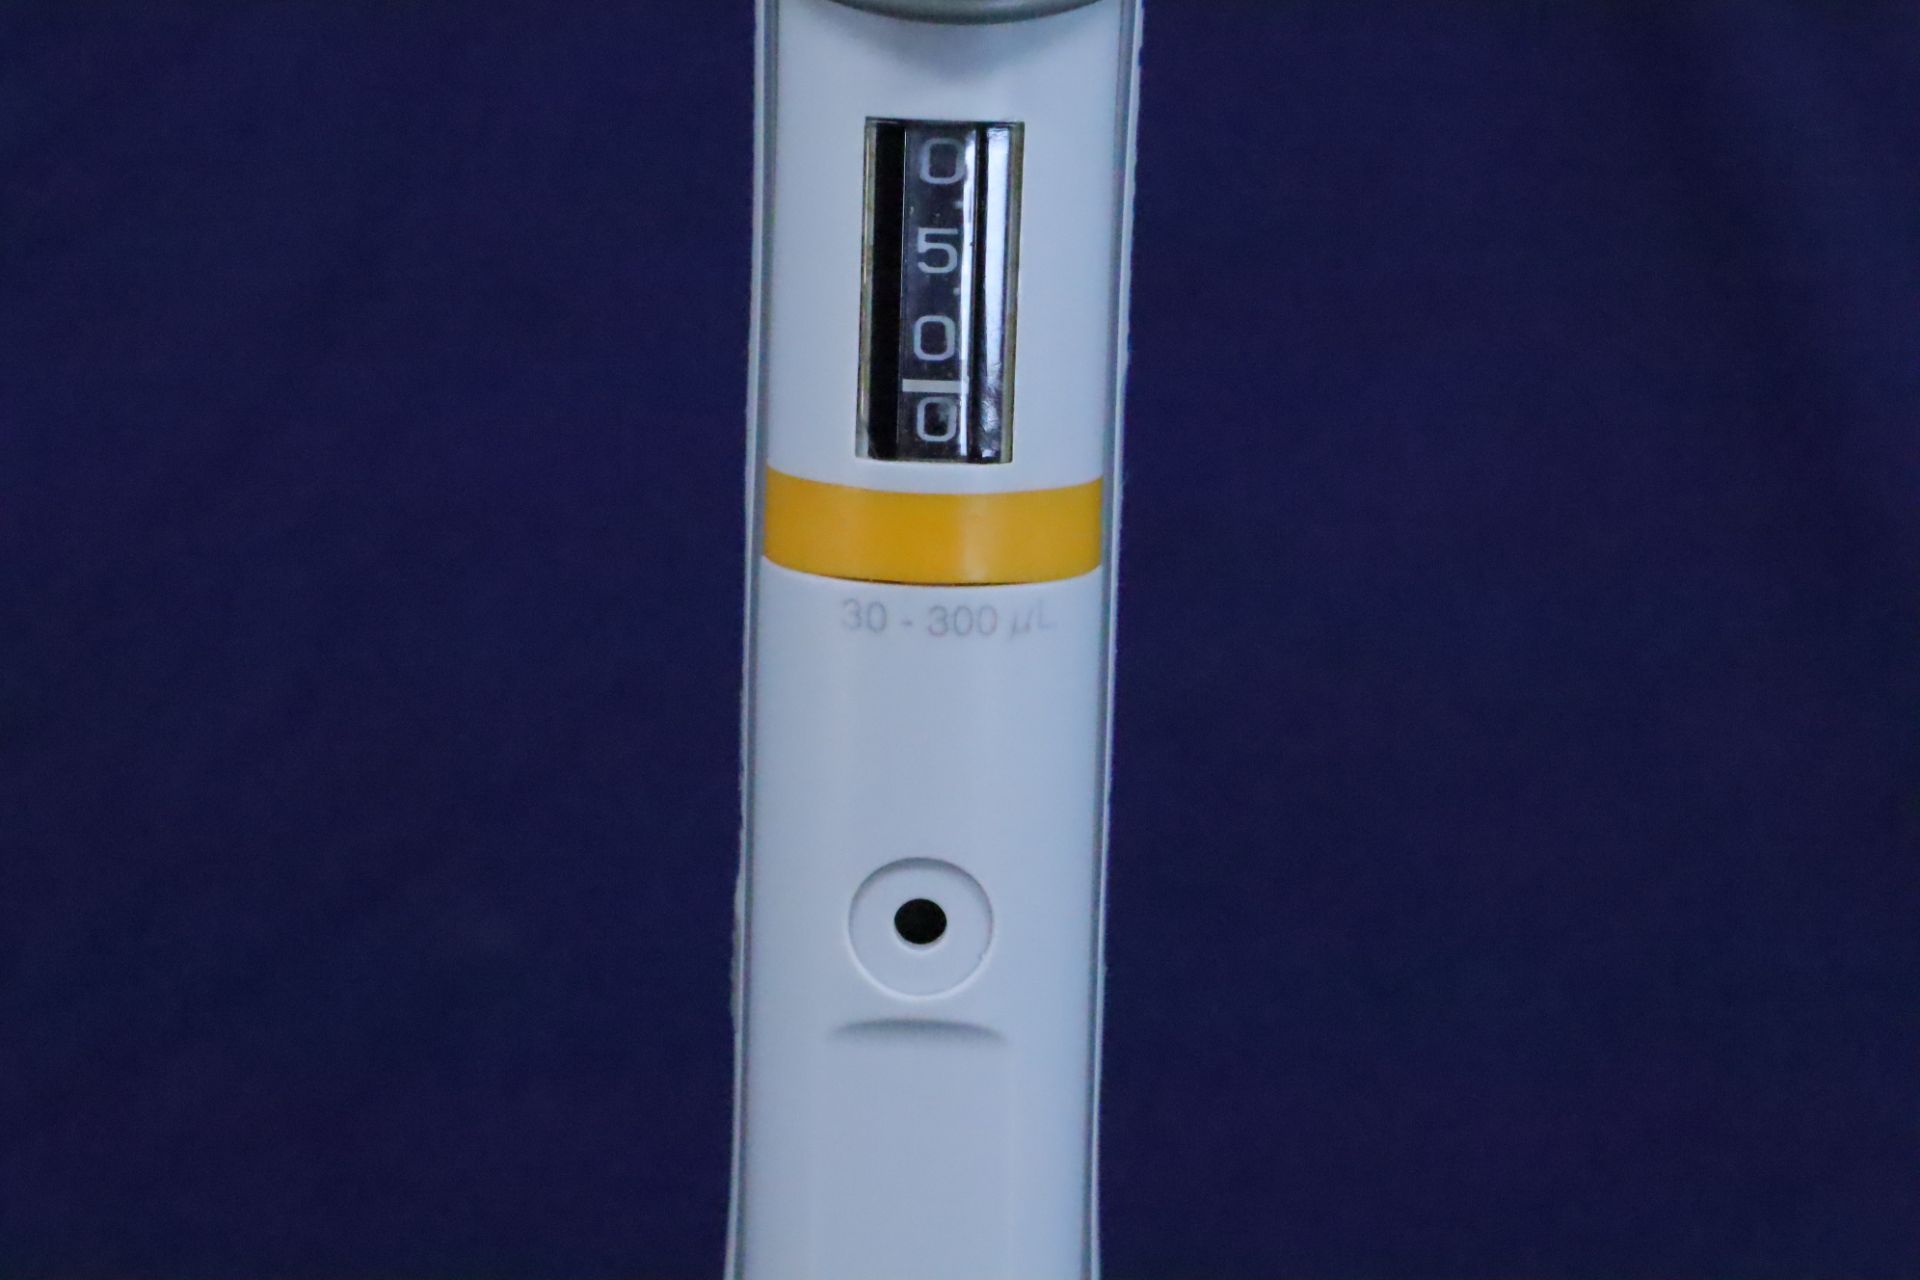 Eppendorf Research Plus Adjustable Volume Pipette 30-300 uL - Image 3 of 4